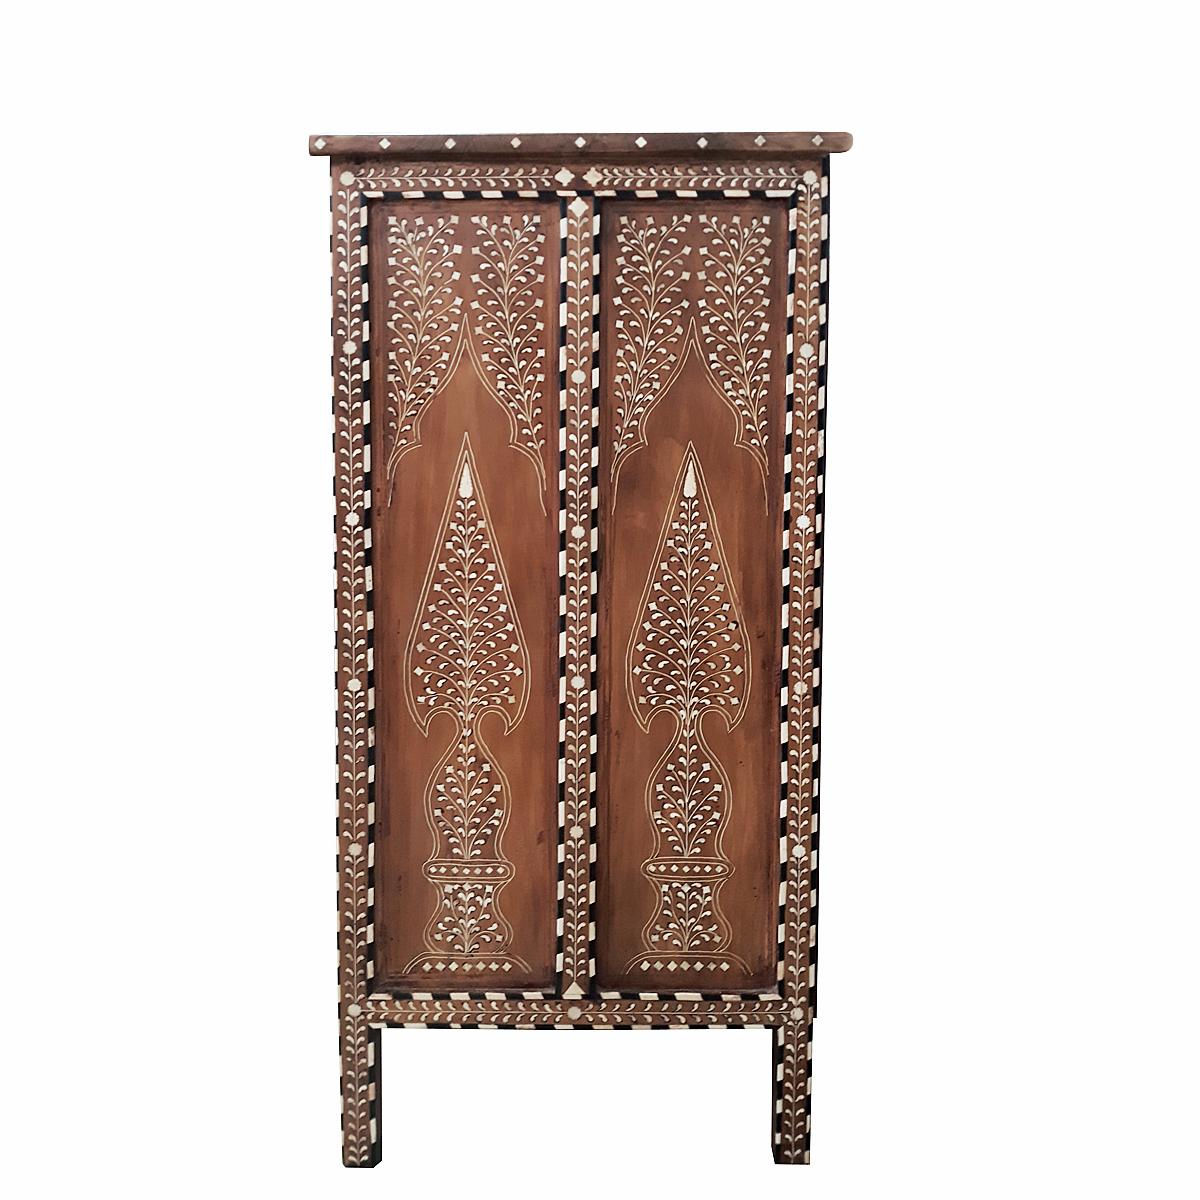 A charming 5-drawer chest, handcrafted in India out of aged teak wood and cruelty-free sourced animal bone inlays. 

Inlay is ancient decorative technique that involves embedding delicate, hand-carved pieces of bone (initially it was ivory or ebony)